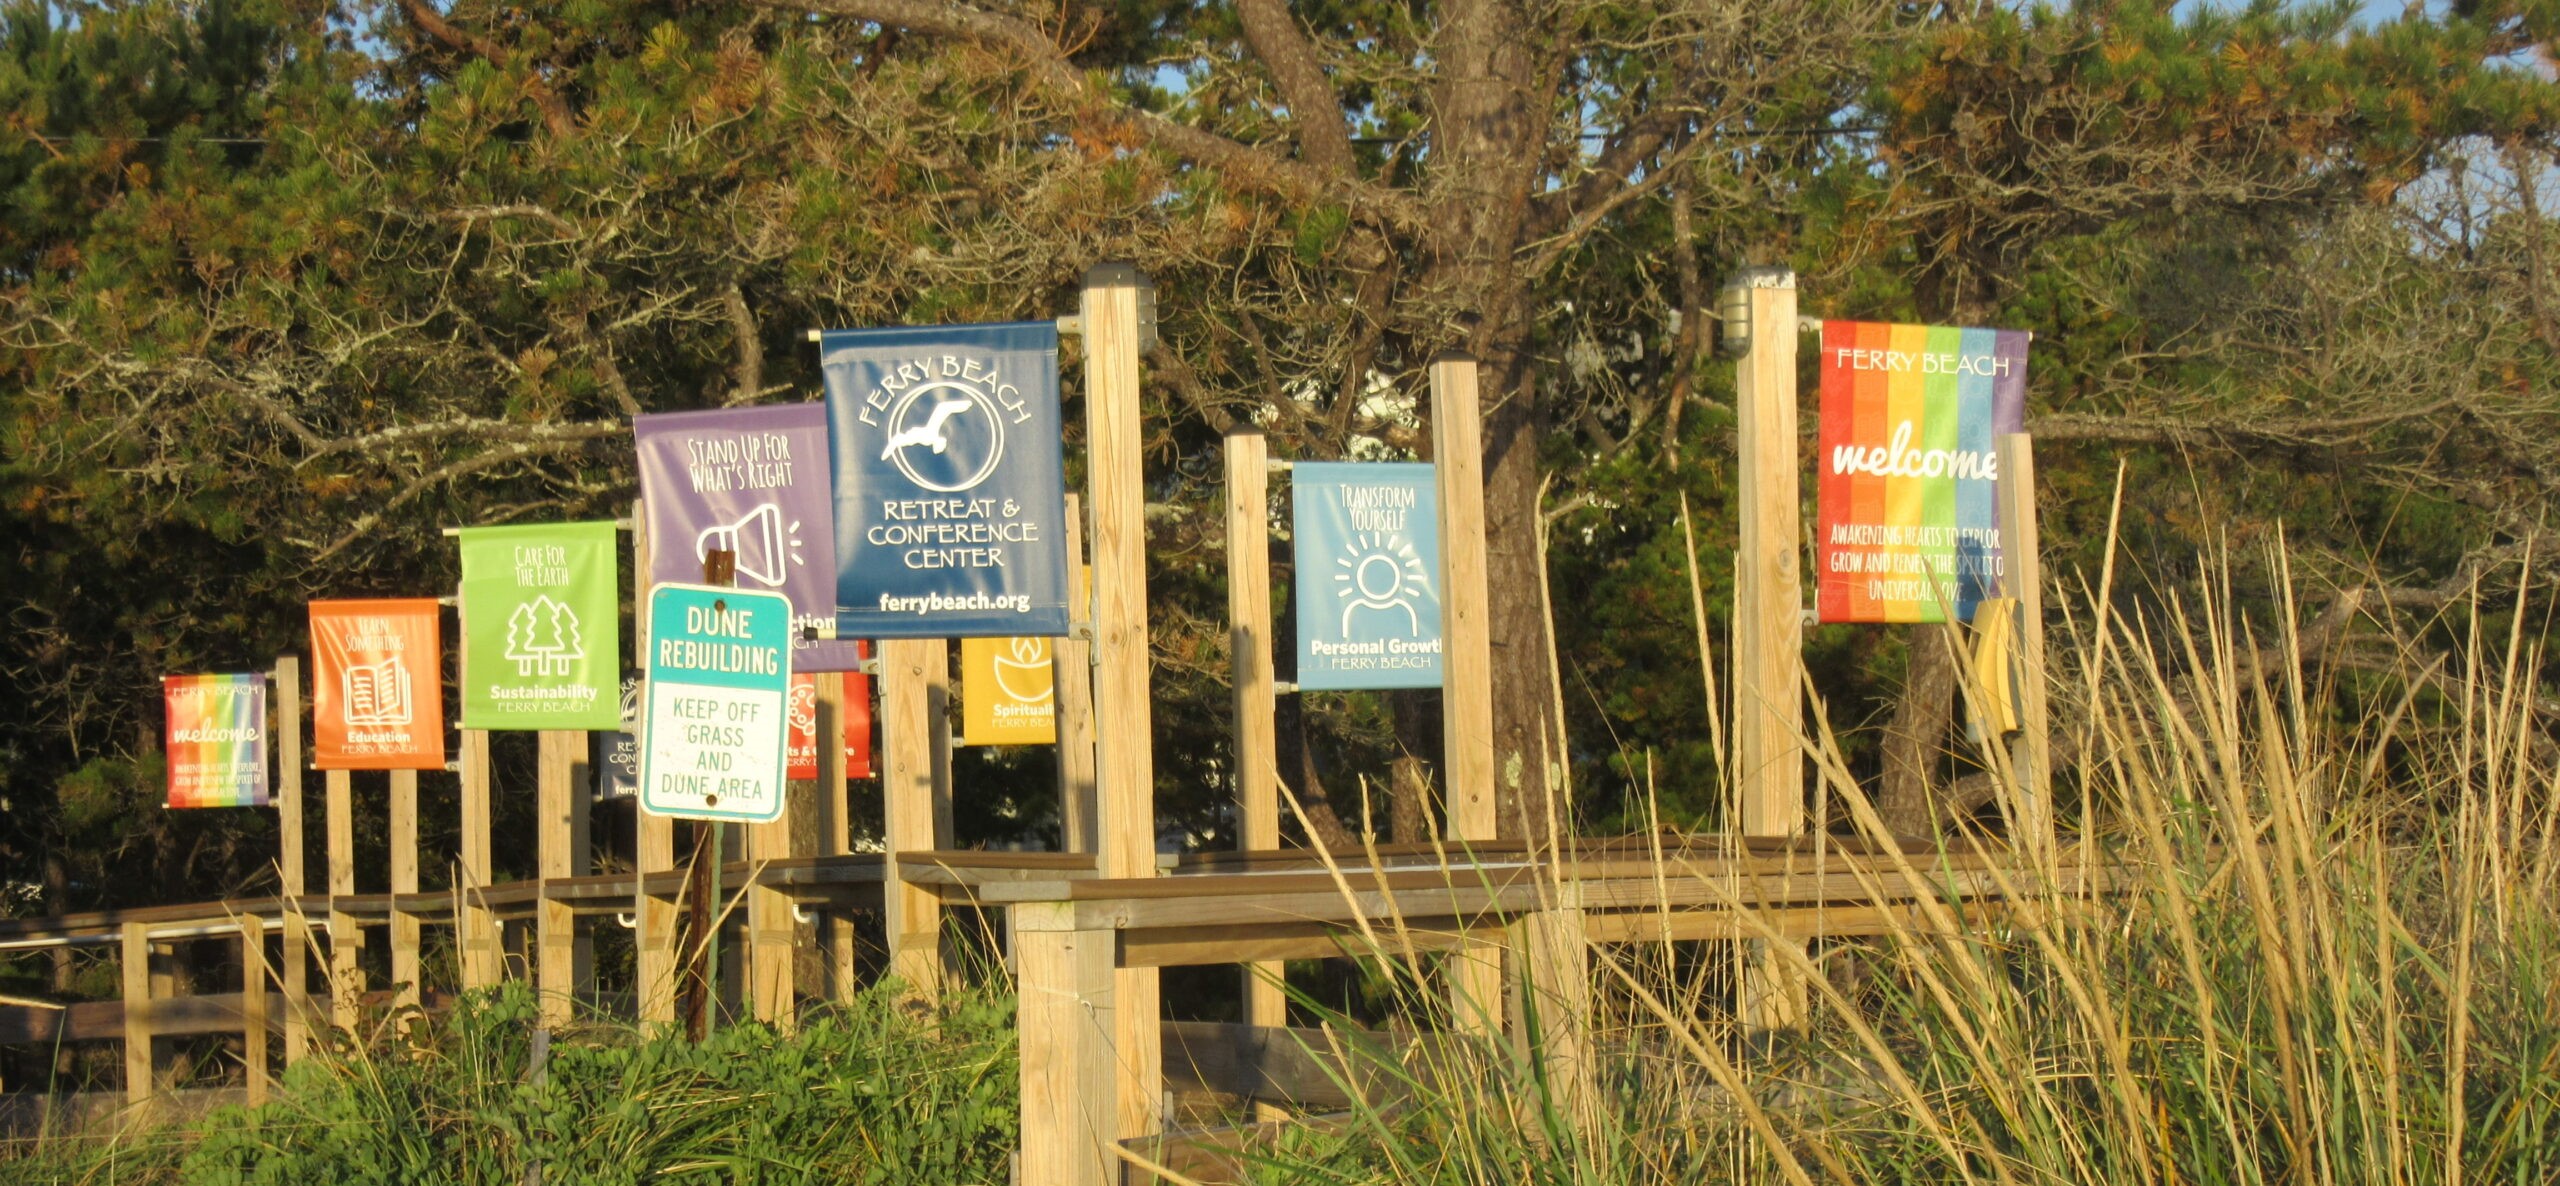 Many multicolored flags on wooden poles wave along a beach with grass and shrubs. A blue flag reads, "Ferry Beach Retreat and Conference Center - ferrybeach.org." A rainbow flag reads, "Ferry Beach - WELCOME - Awakening Hearts to Explore, Grow, and Renew the Spirit of Universal Love." A purple flag reads, "Stand Up for What's Right."